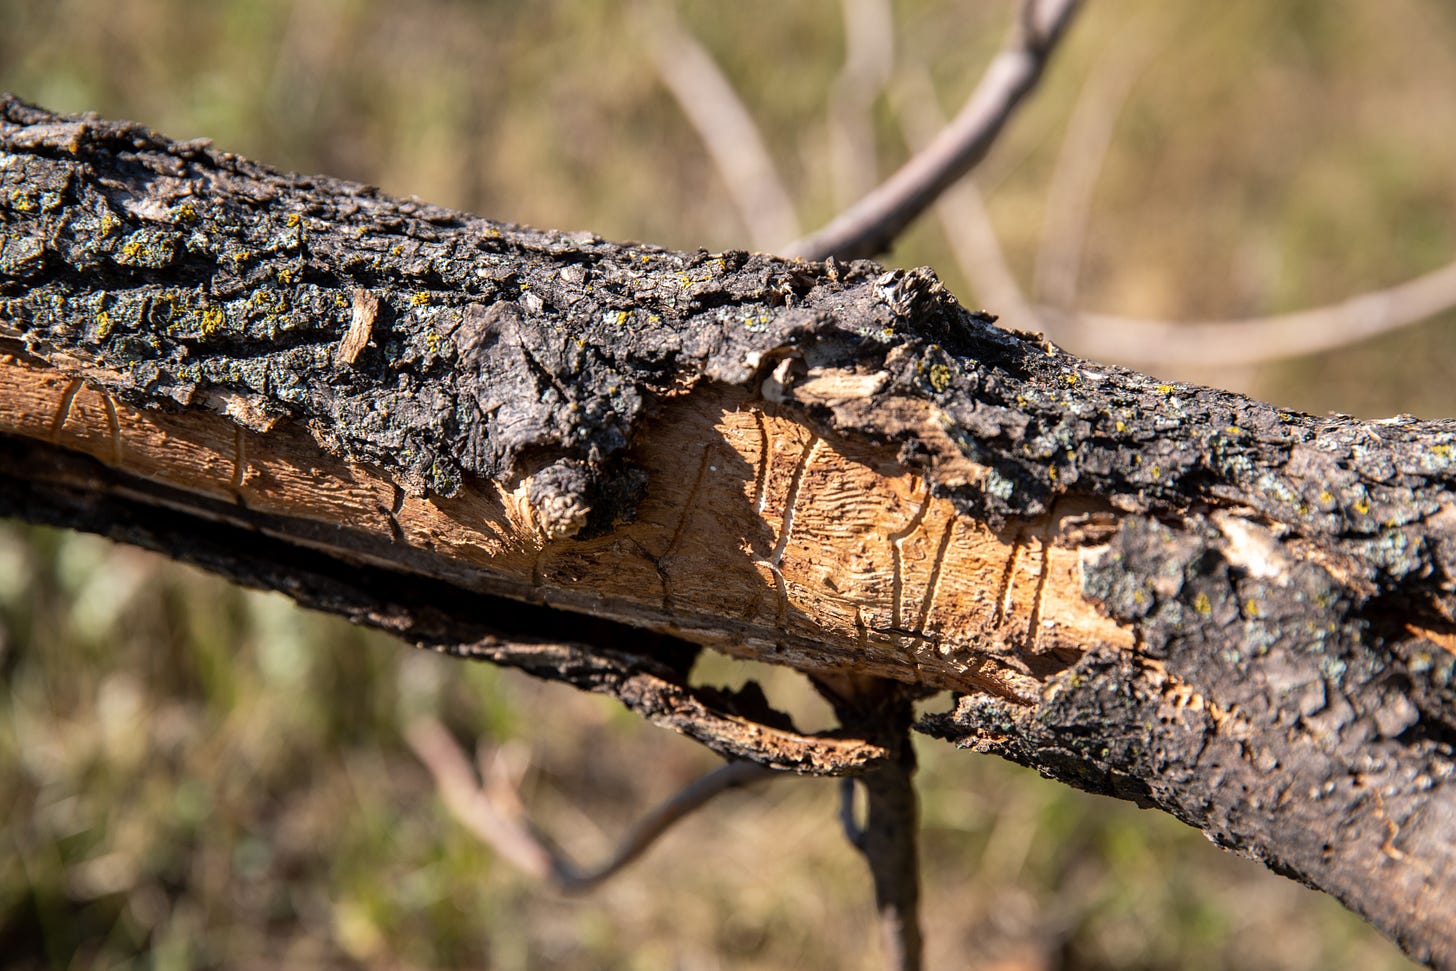 a branch with bark falling off revealing pale yellow wood with groves from tunnelling larvae.